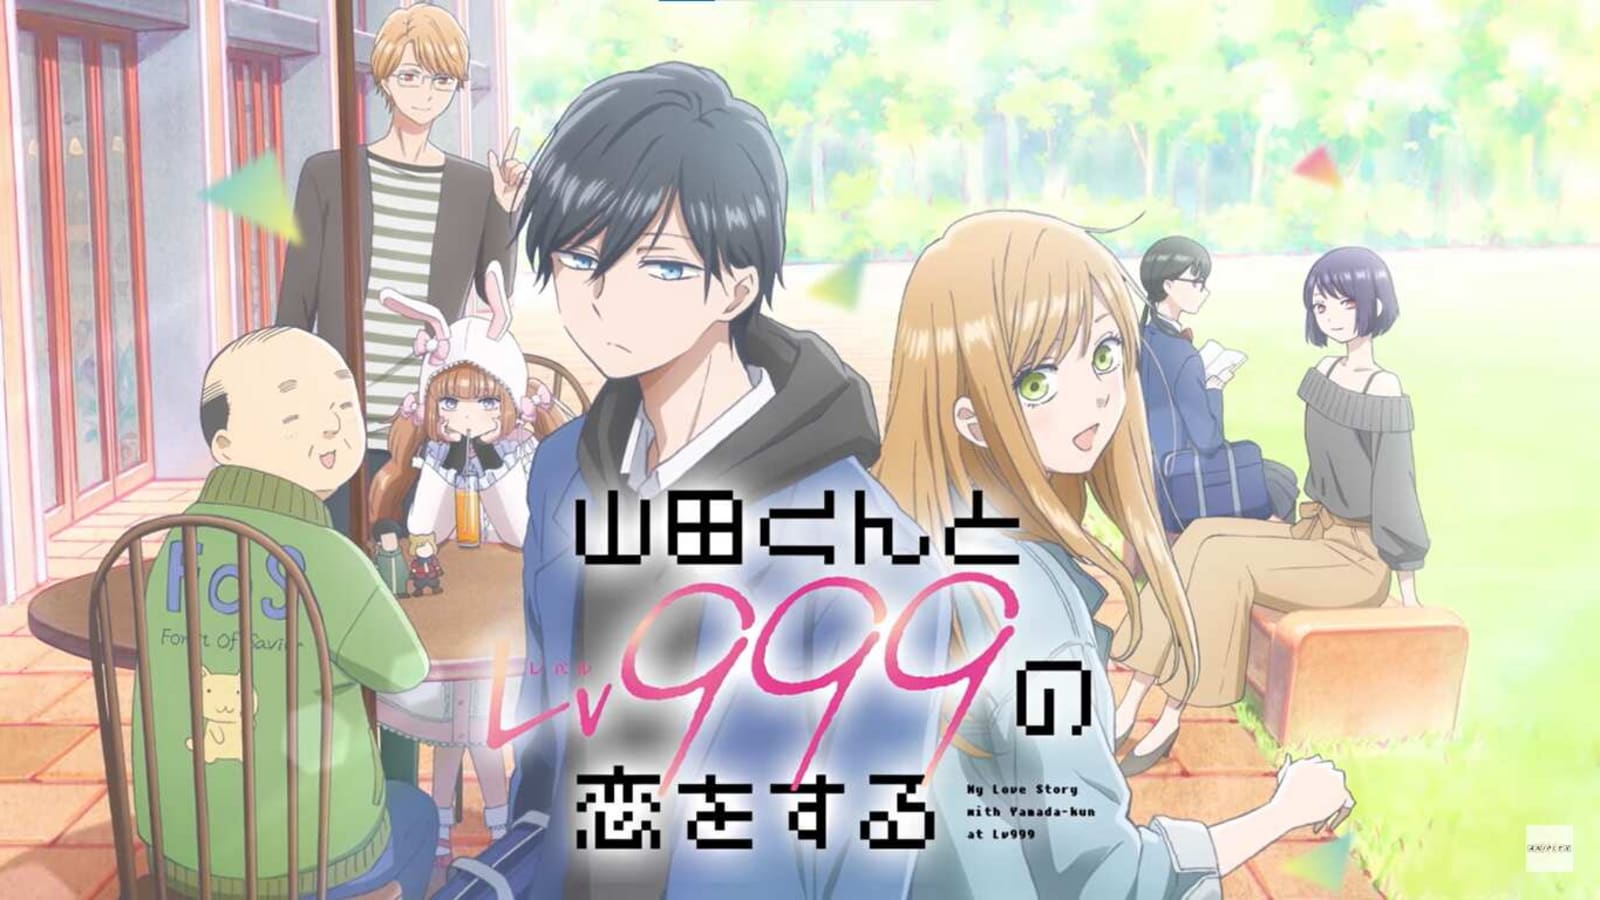 Love And Adventure Await In My Love Story With Yamada Kun At Lv999 Anime